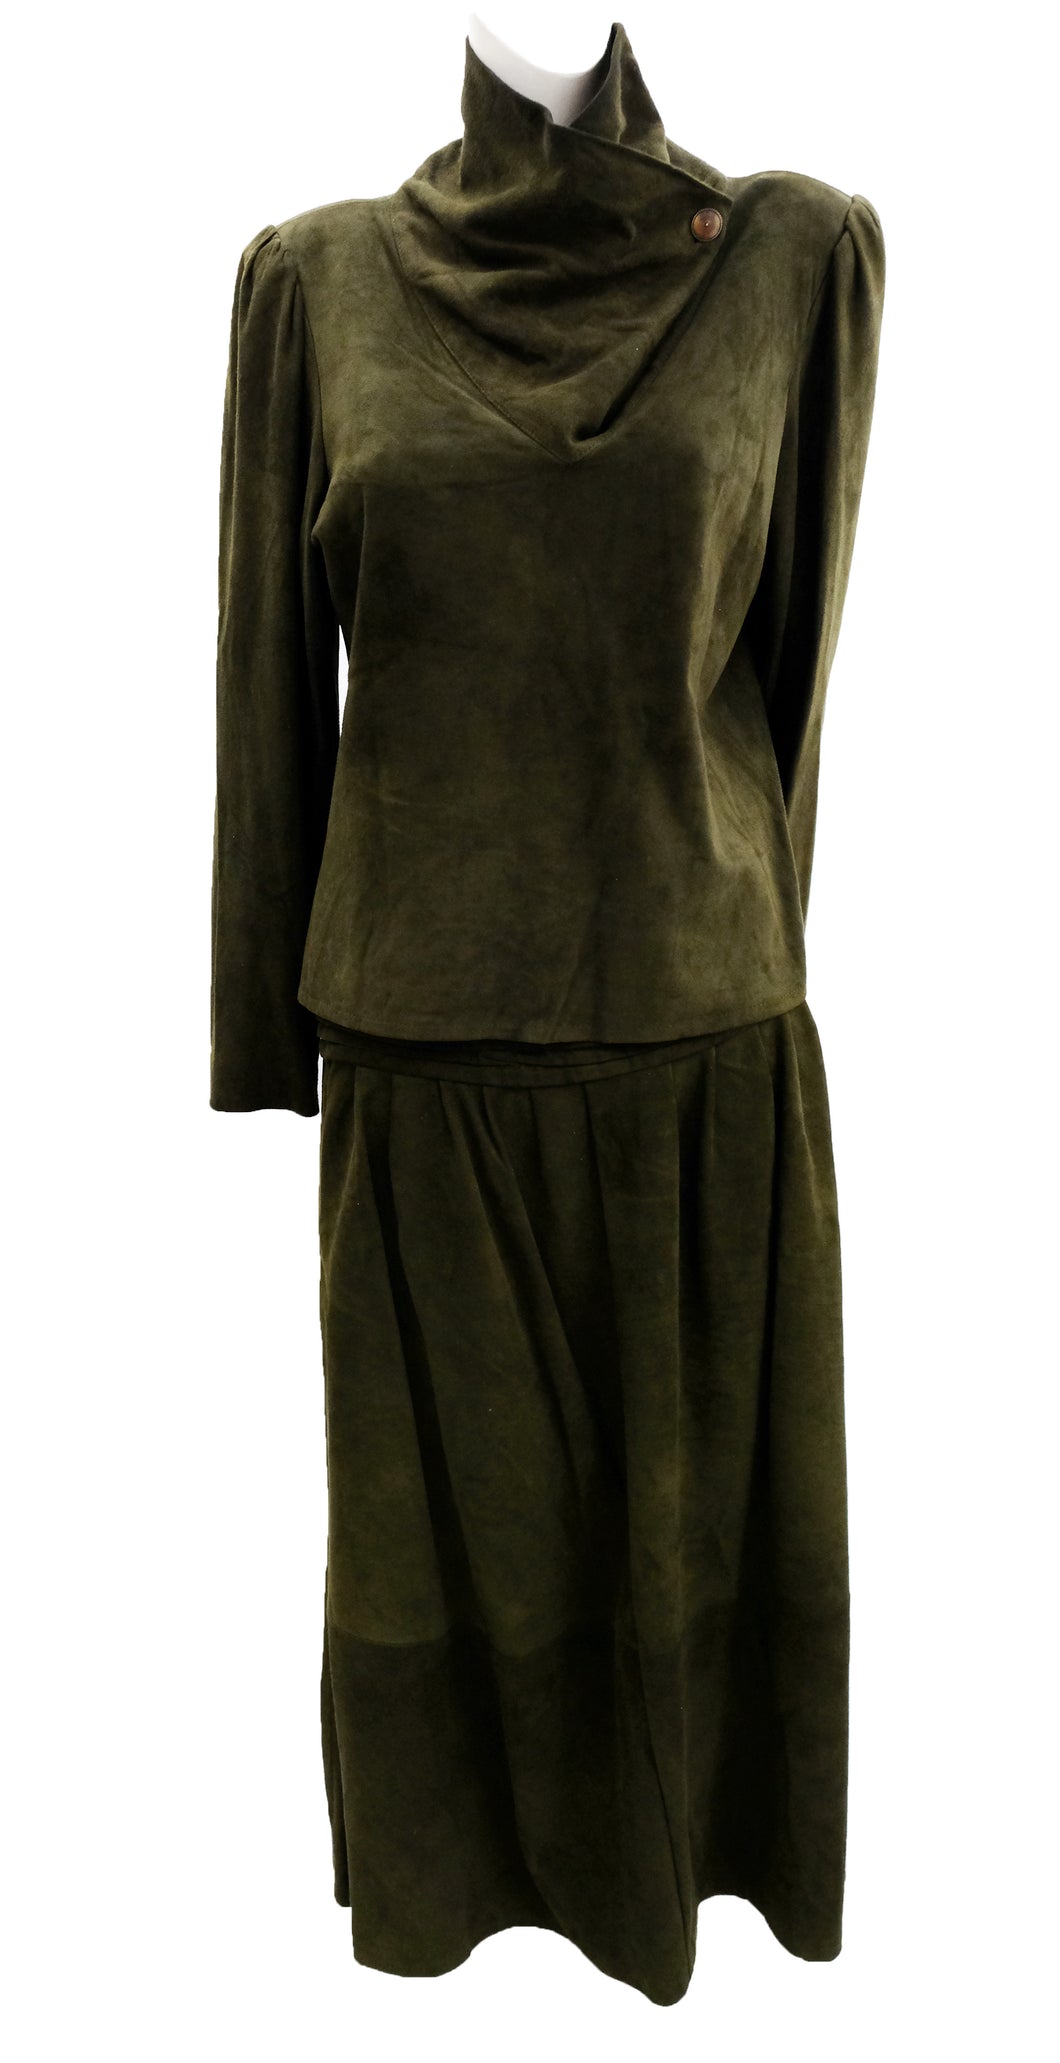 Farideh 1980s Vintage Green Suede 2-piece Skirt Suit, UK12-14